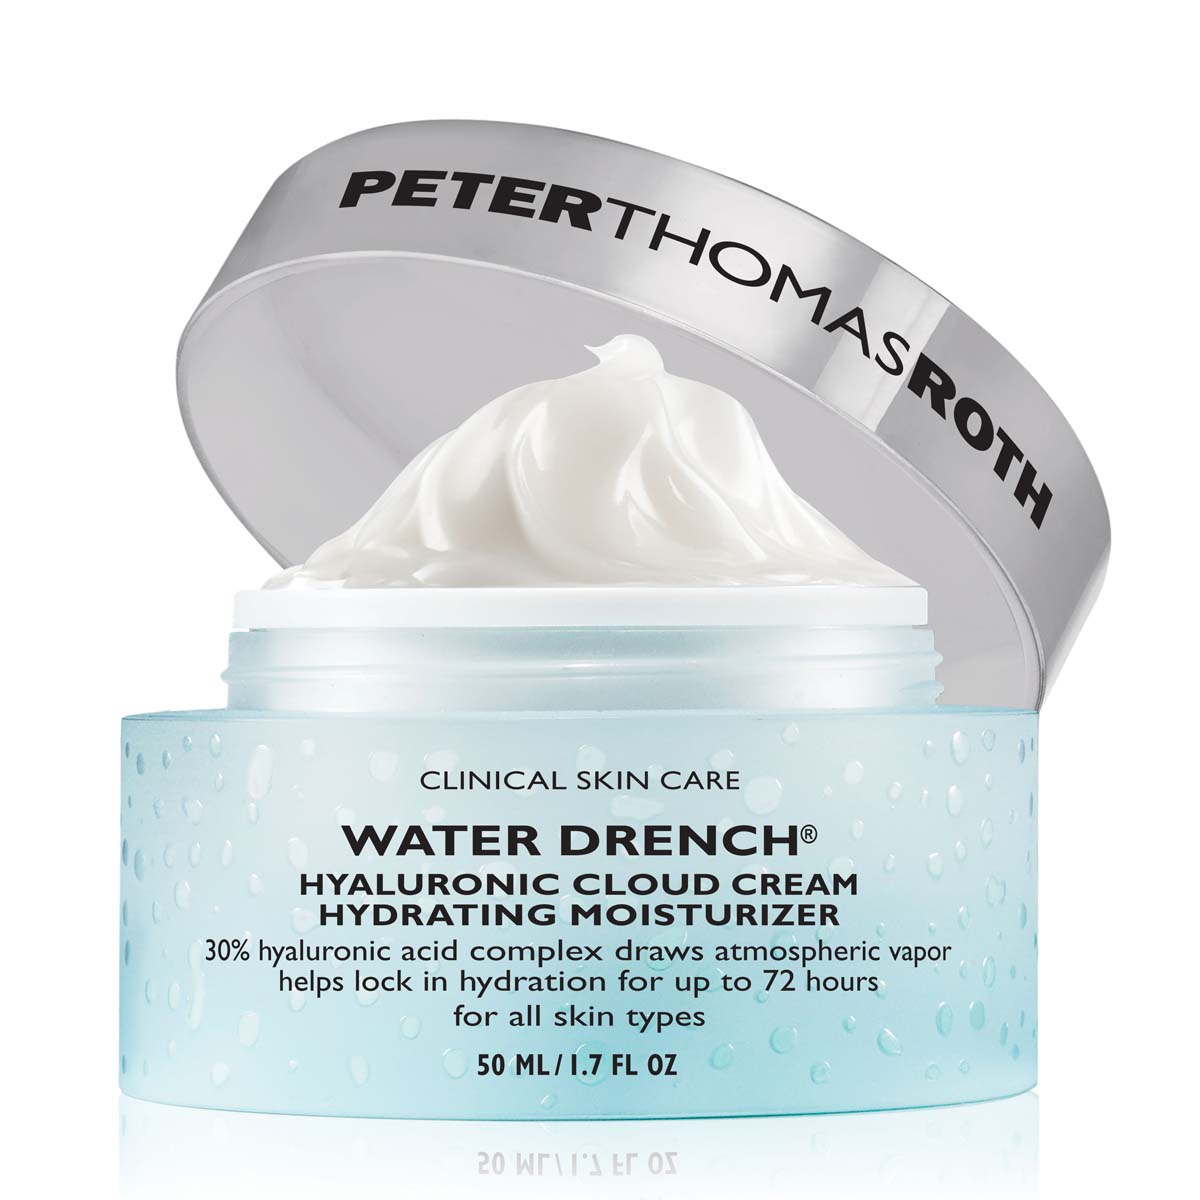 Peter Thomas Roth Water Drench Hyaluronic Cloud Cream Hydrating Moisturizer 50Ml